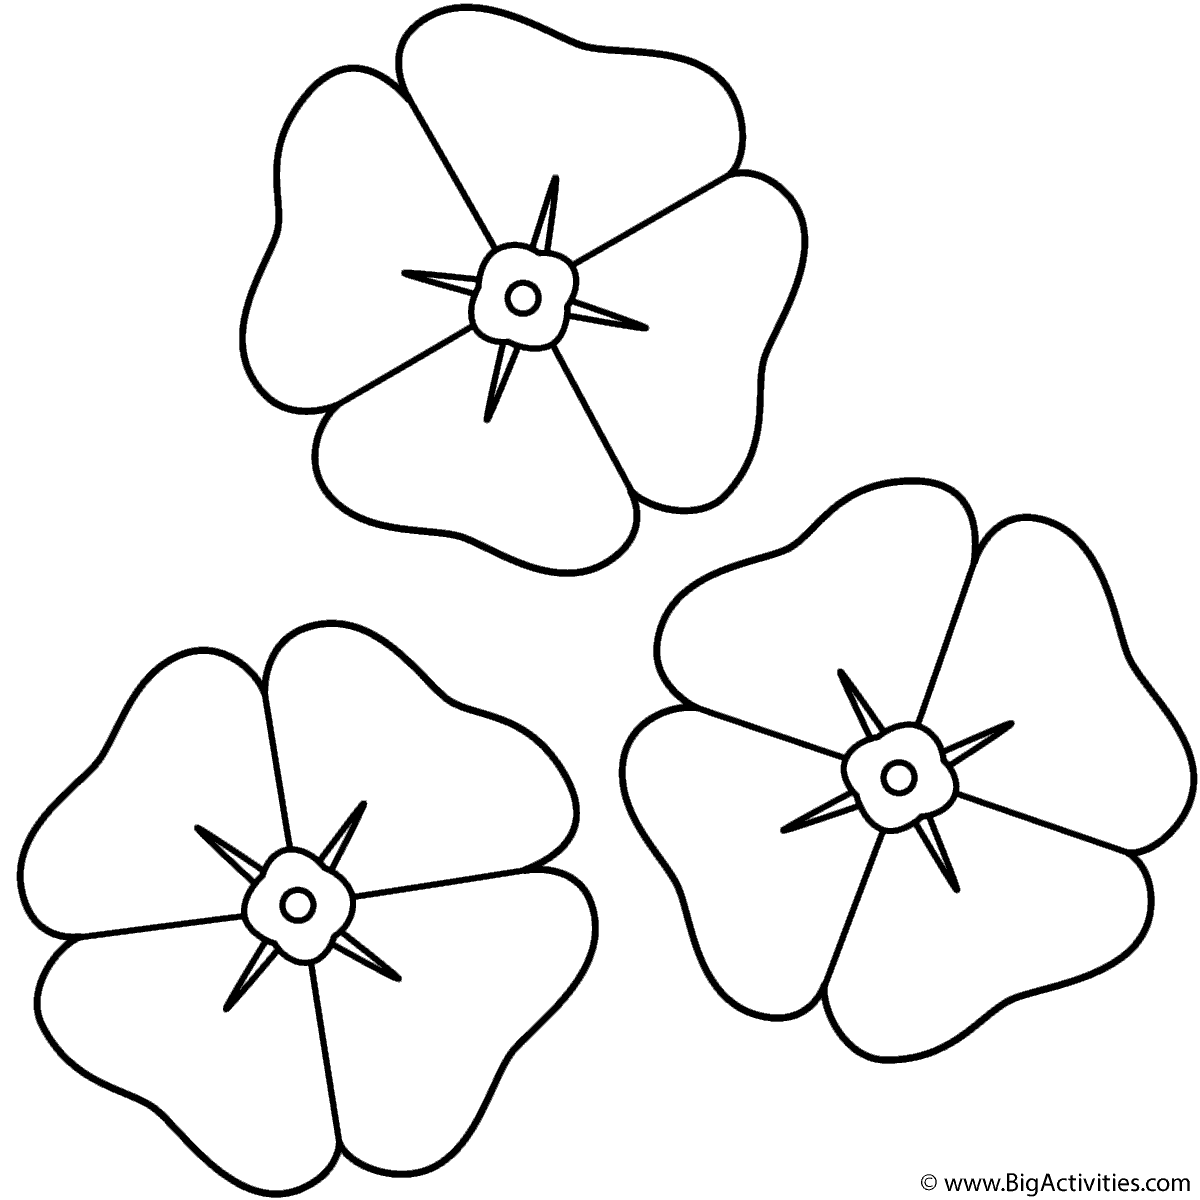 united states coloring map pages - photo #26